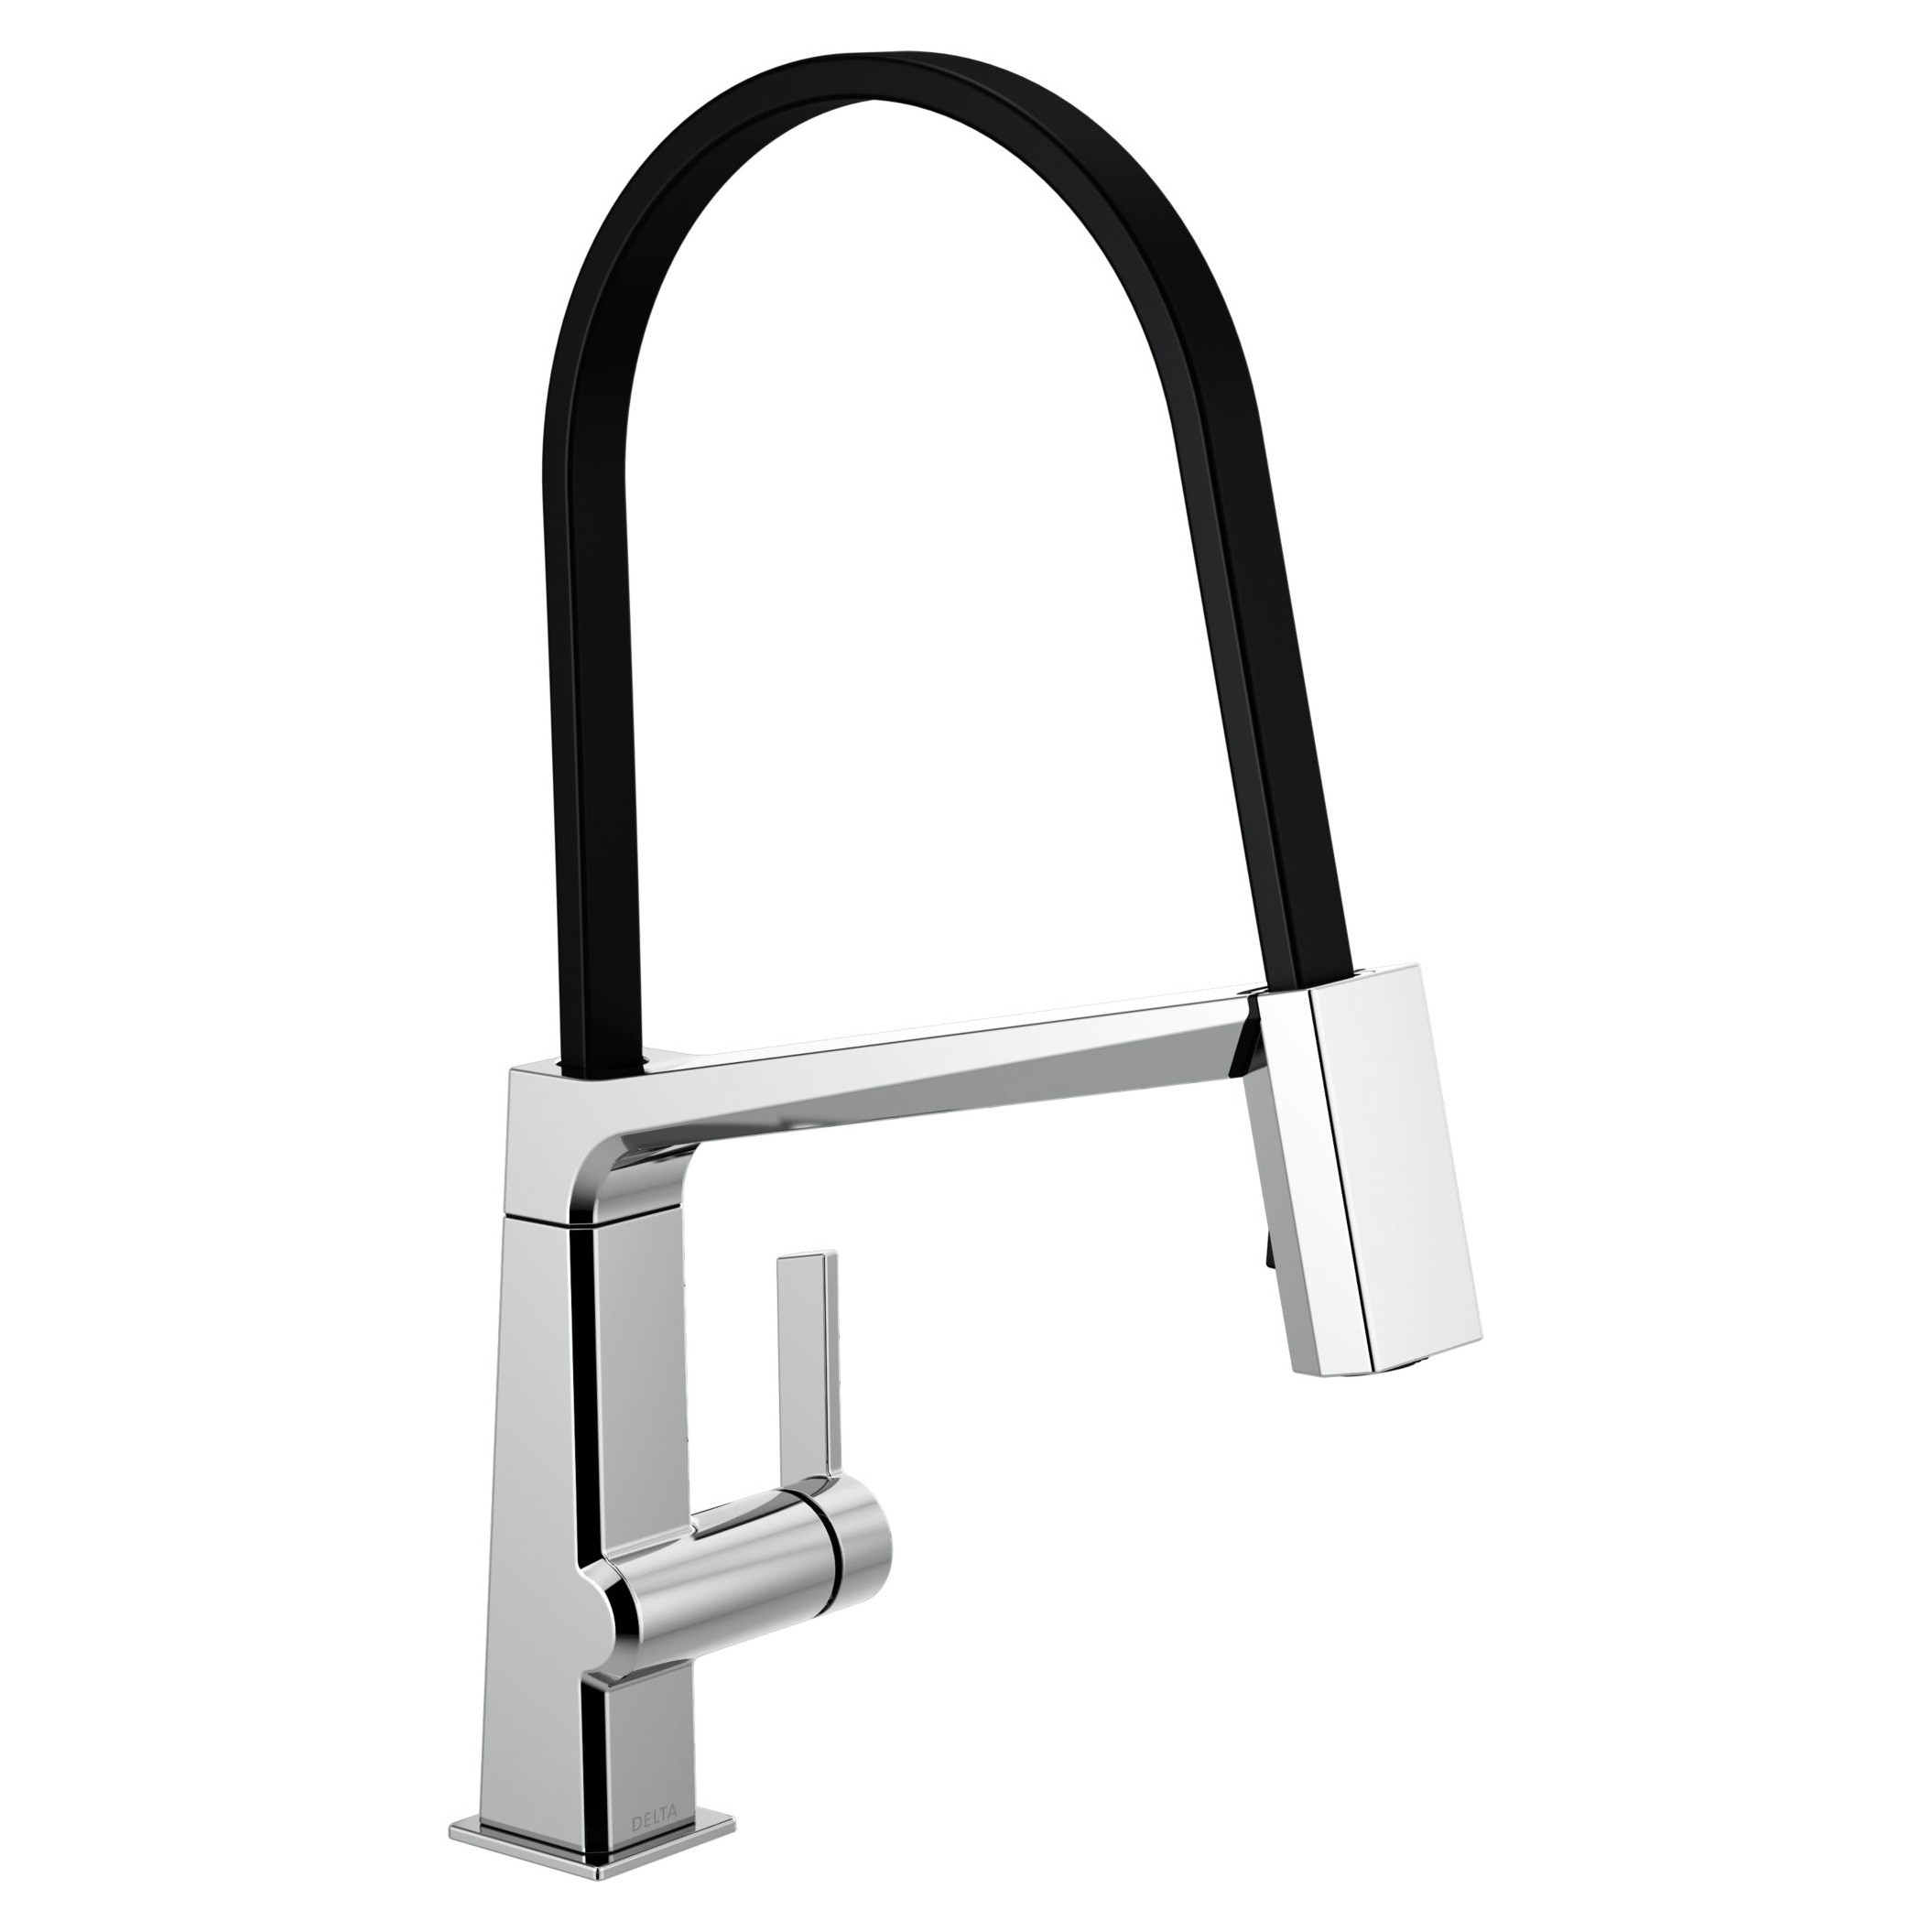 Pivotal 1 Handle Exposed Hose Kitchen Faucet in Chrome